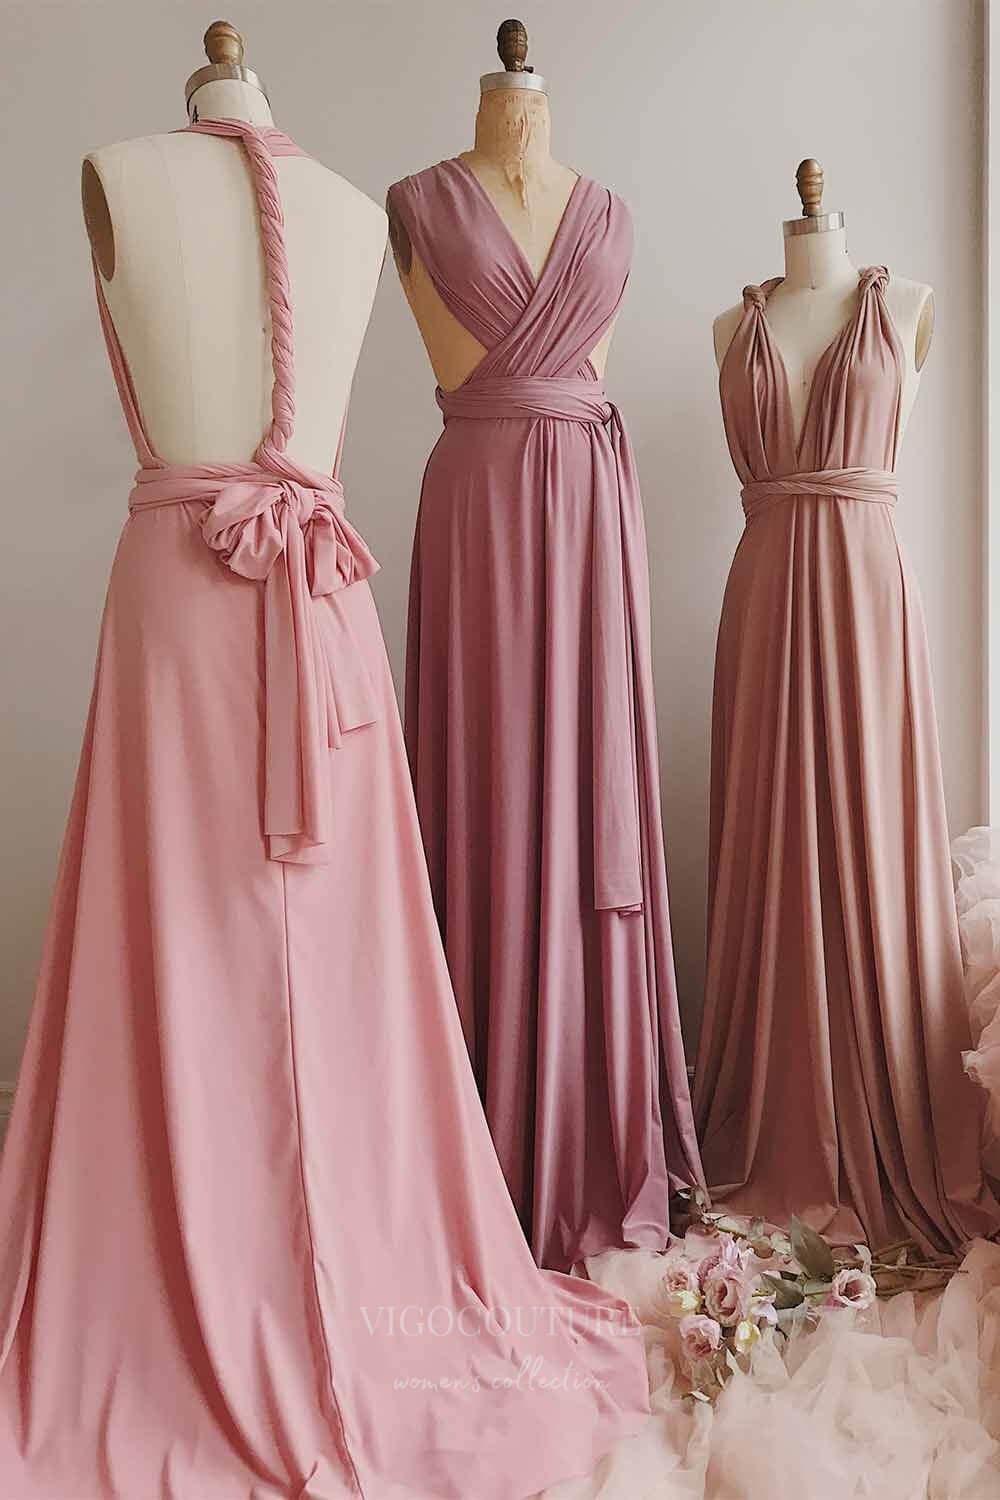 vigocouture-Convertible Bridesmaid Dress Stretchable Woven Dress Pleated Prom Dress Multiway Dress 20860-Blush-Prom Dresses-vigocouture-Custom Colors-US2-